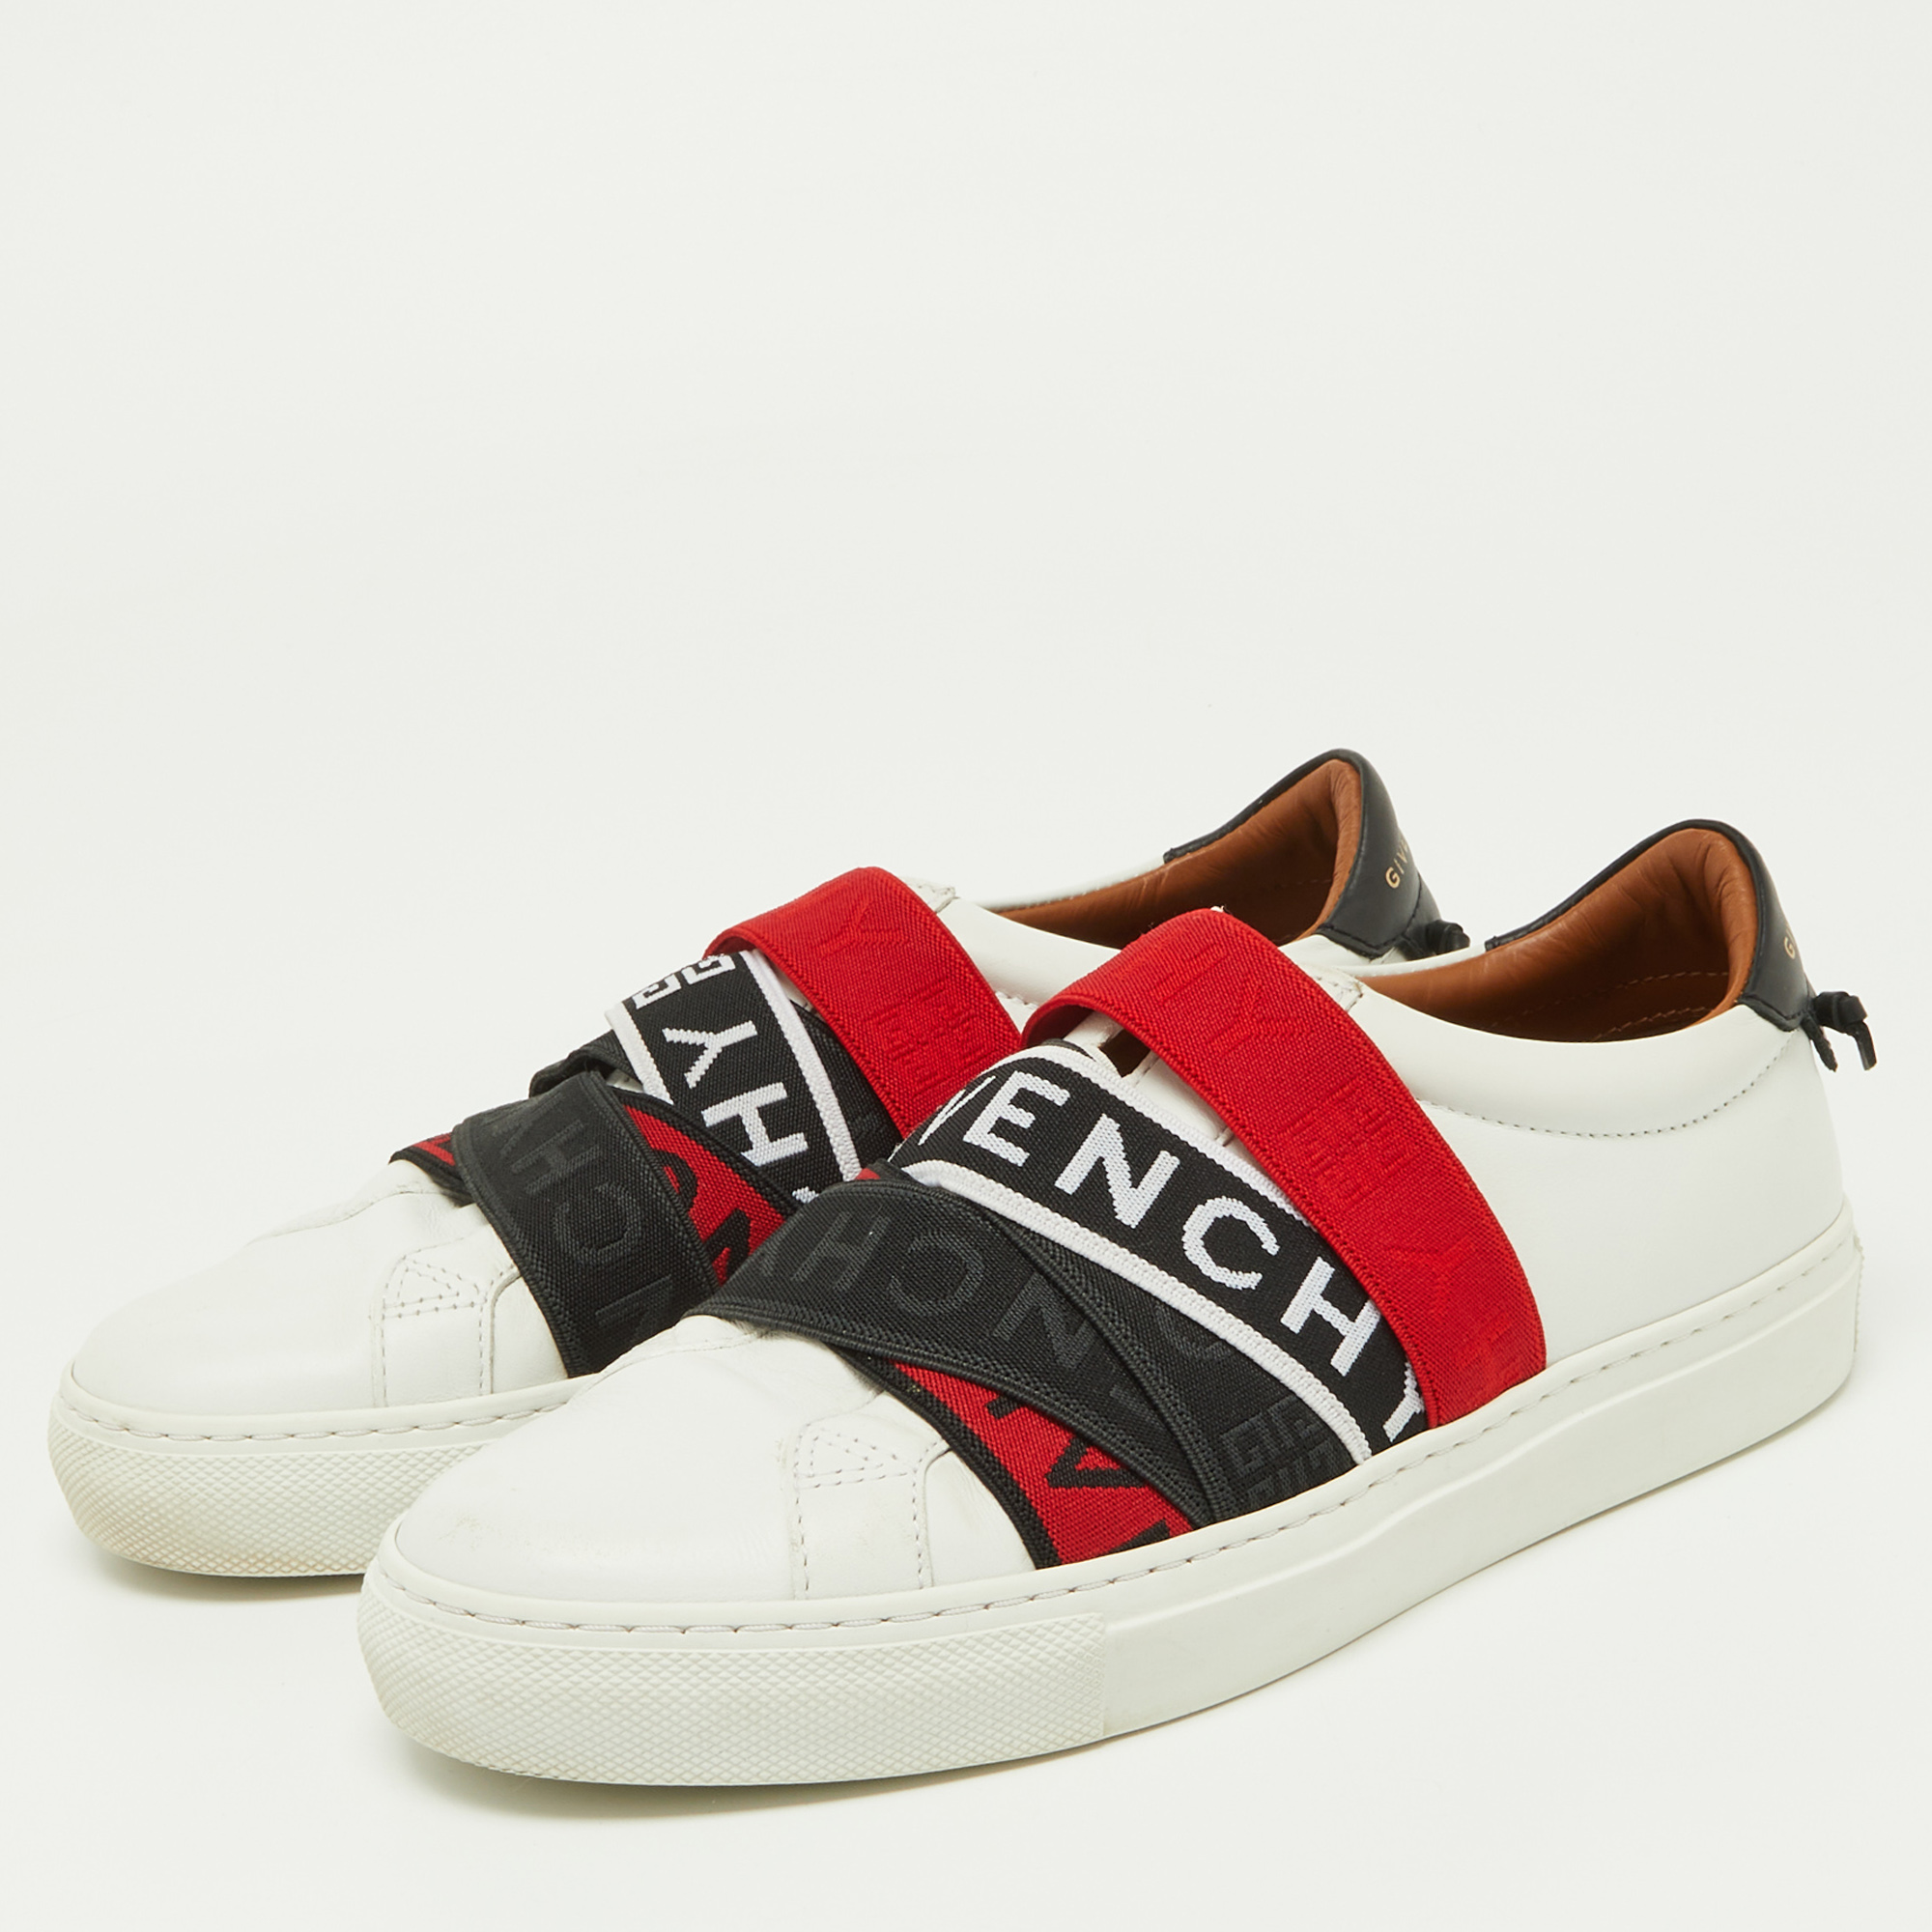 

Givenchy White/Red Leather and Logo Stretch Band Urban Street Slip On Sneakers Size